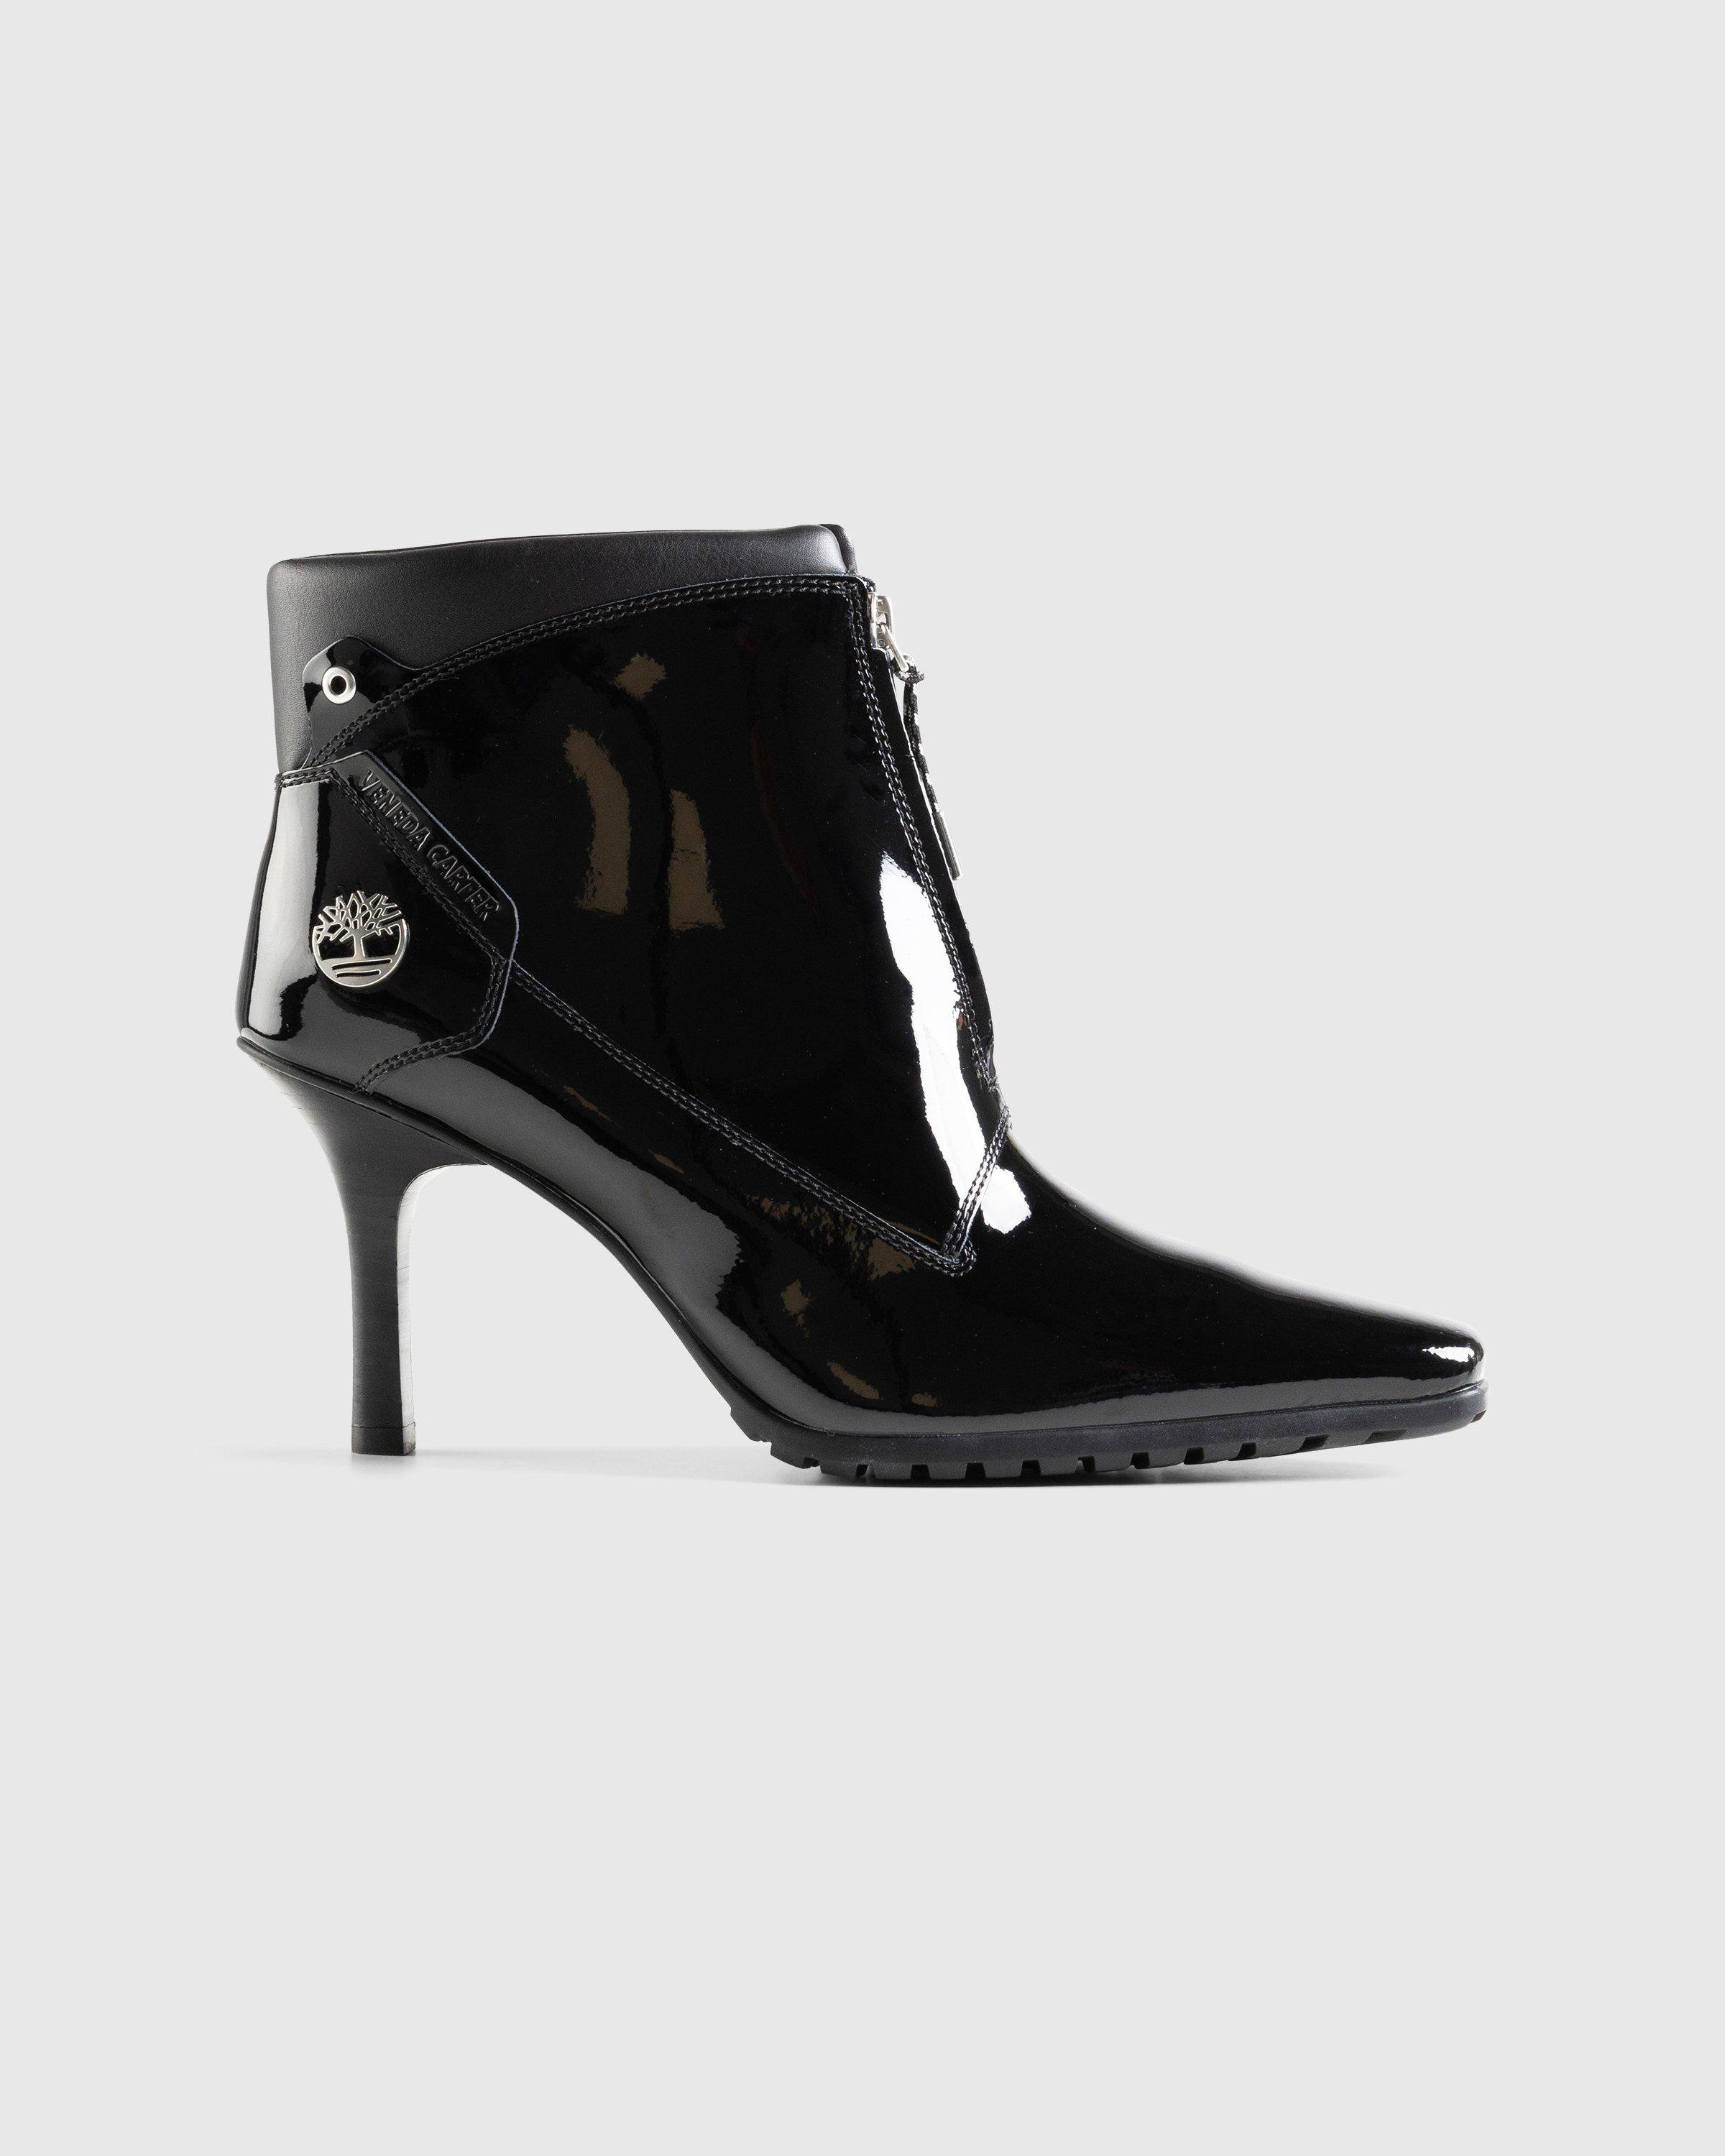 Veneda Carter x TimberlandMid Zip-Up Boot Black Patent Leather by HIGHSNOBIETY